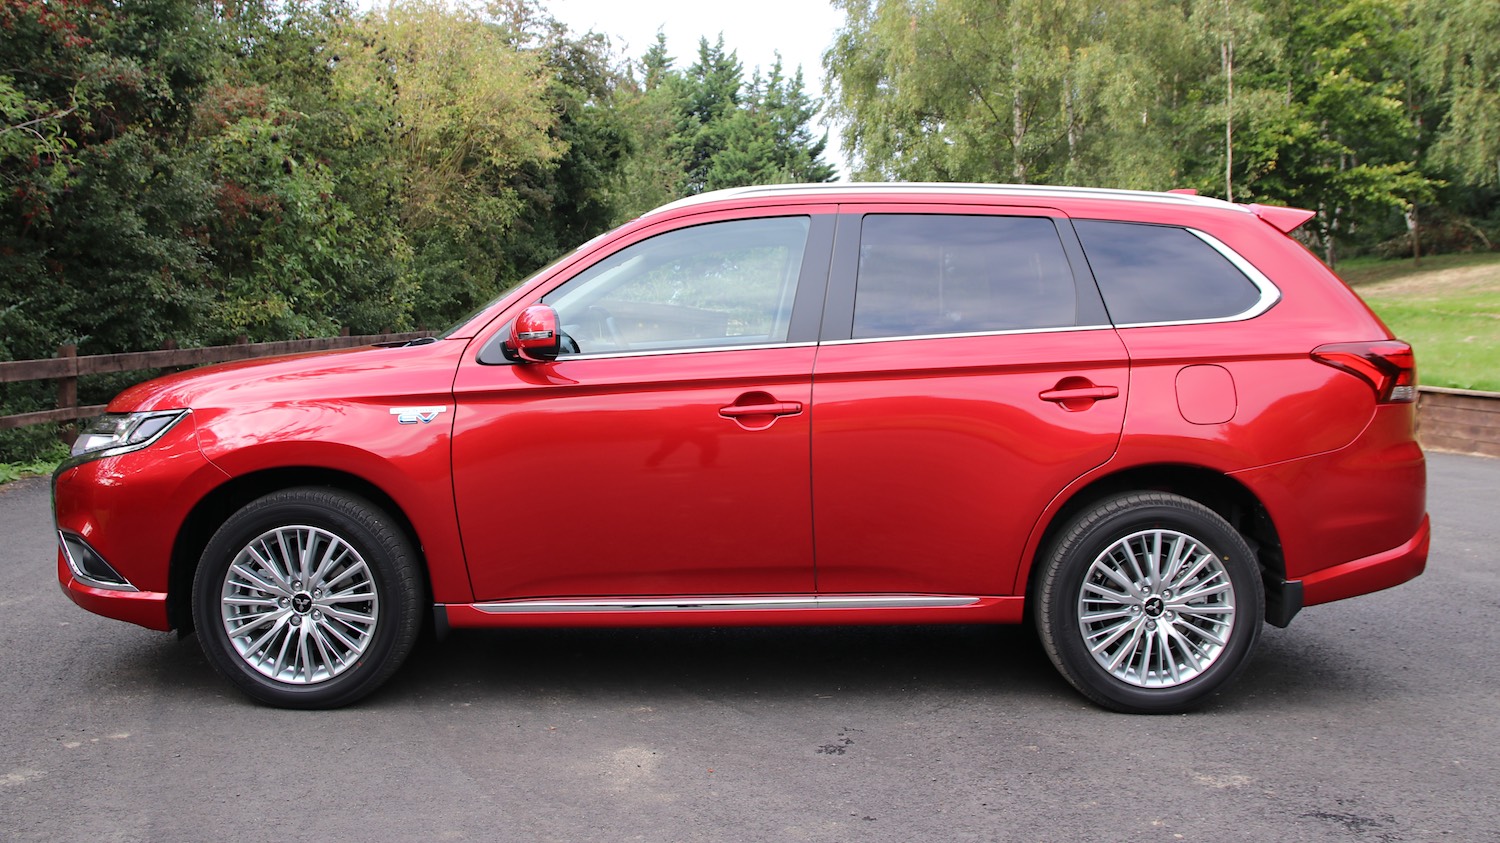 Maggie Barry reviews the latest 2019 Mitsubishi Outlander PHEV 5